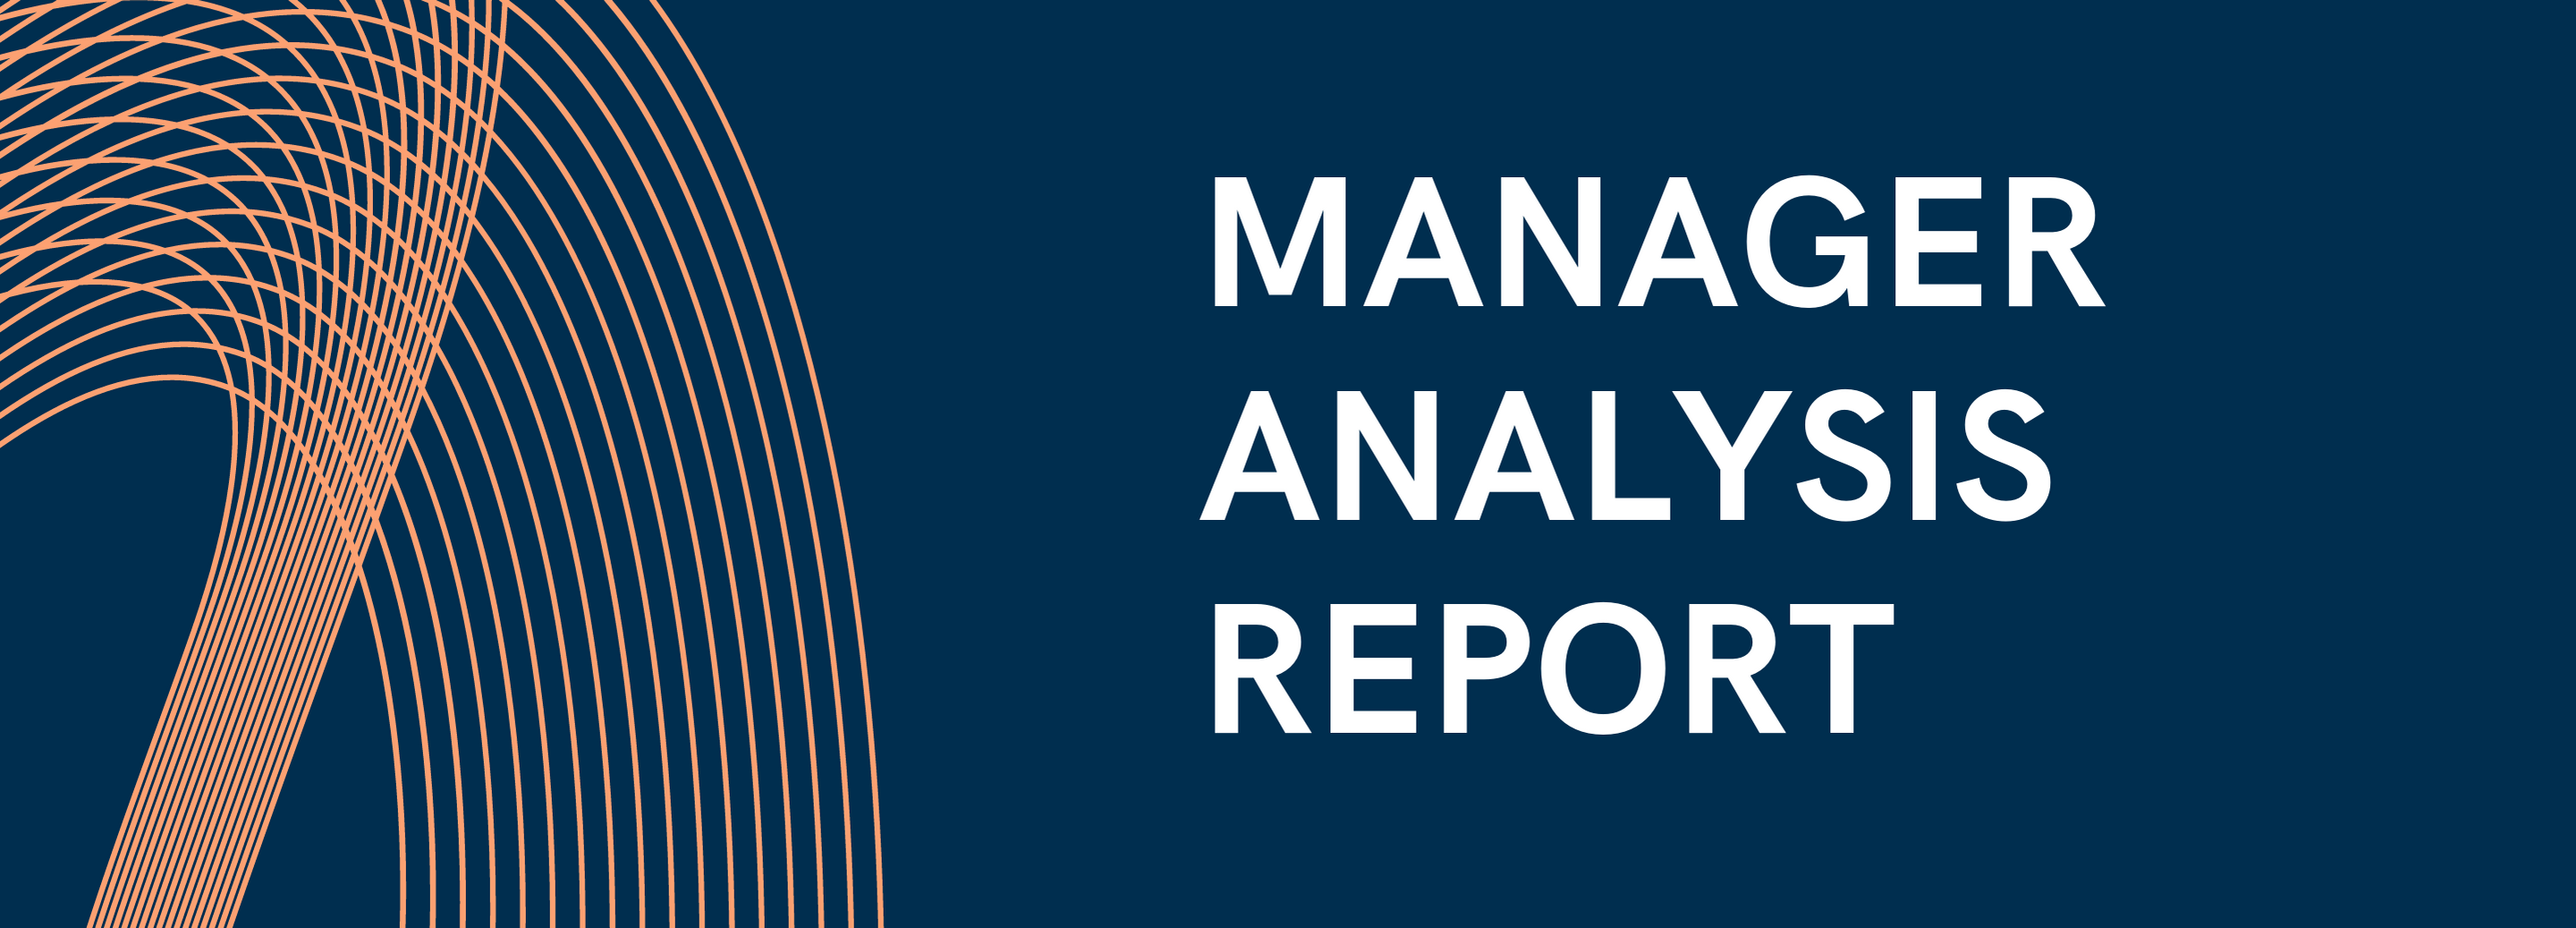 Introducing The Manager Analysis Report